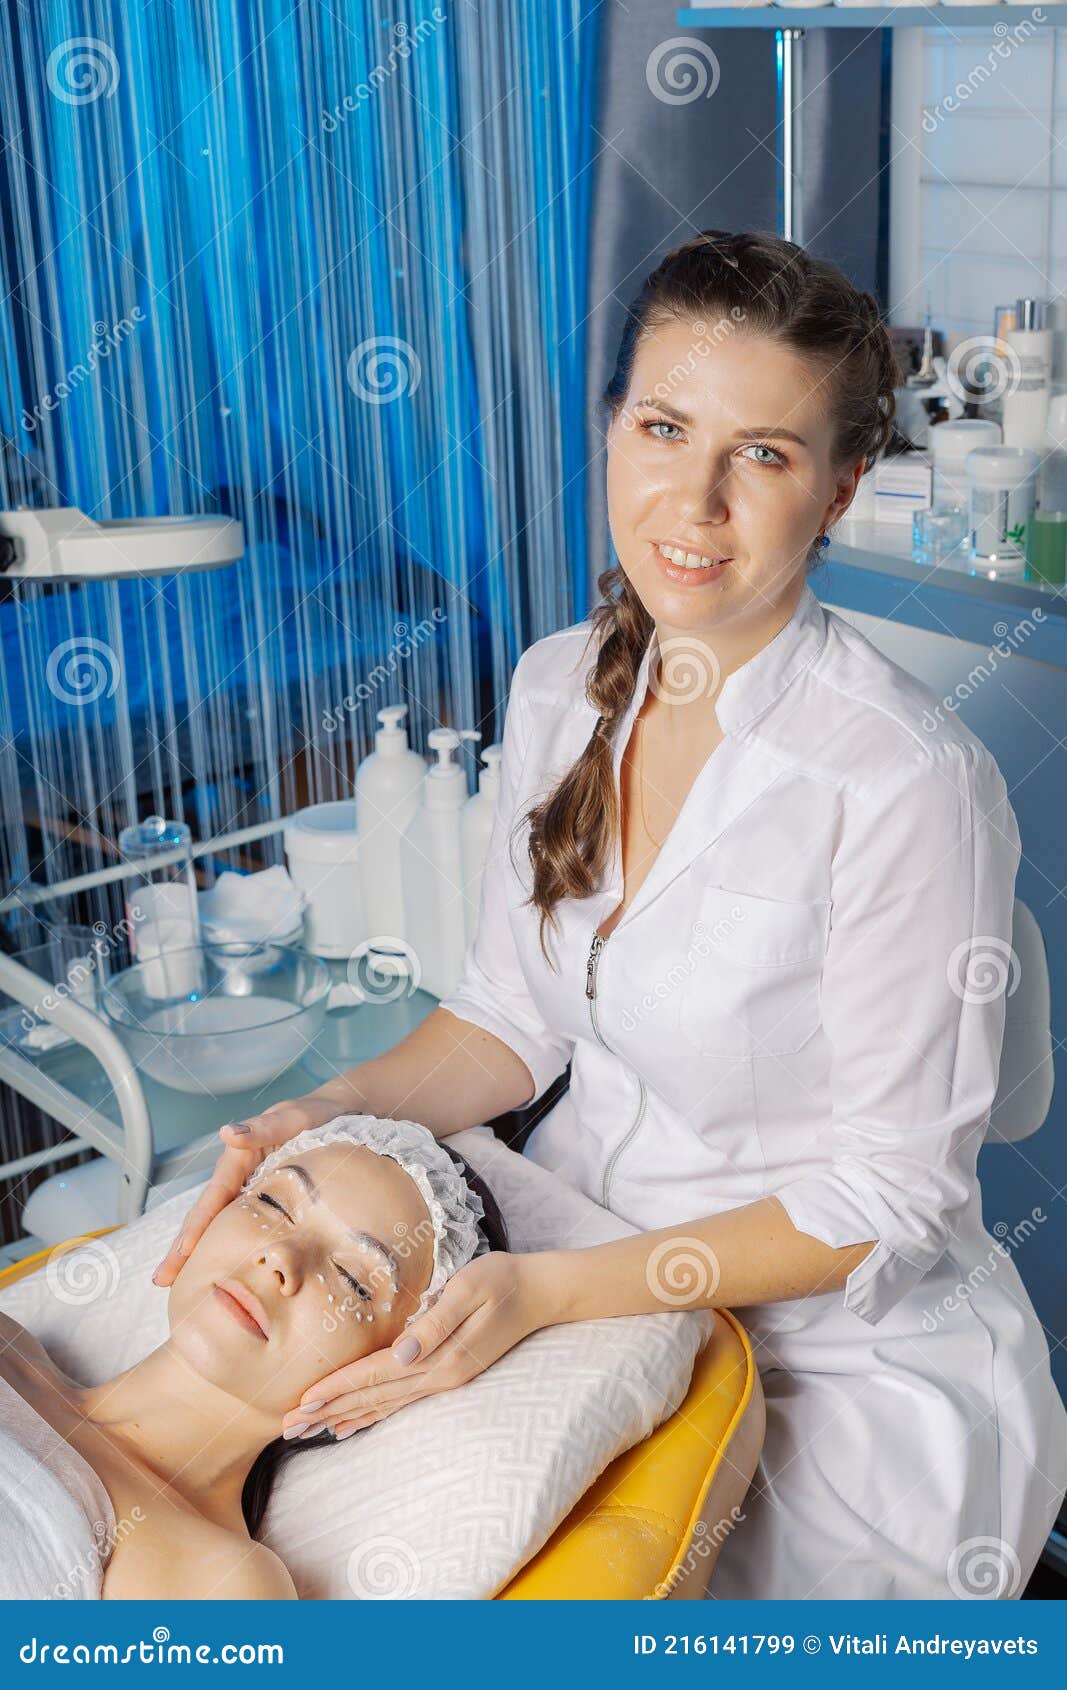 Professional Beautician Makes A Facial Massage To A Woman Stock Image Image Of Hands Health